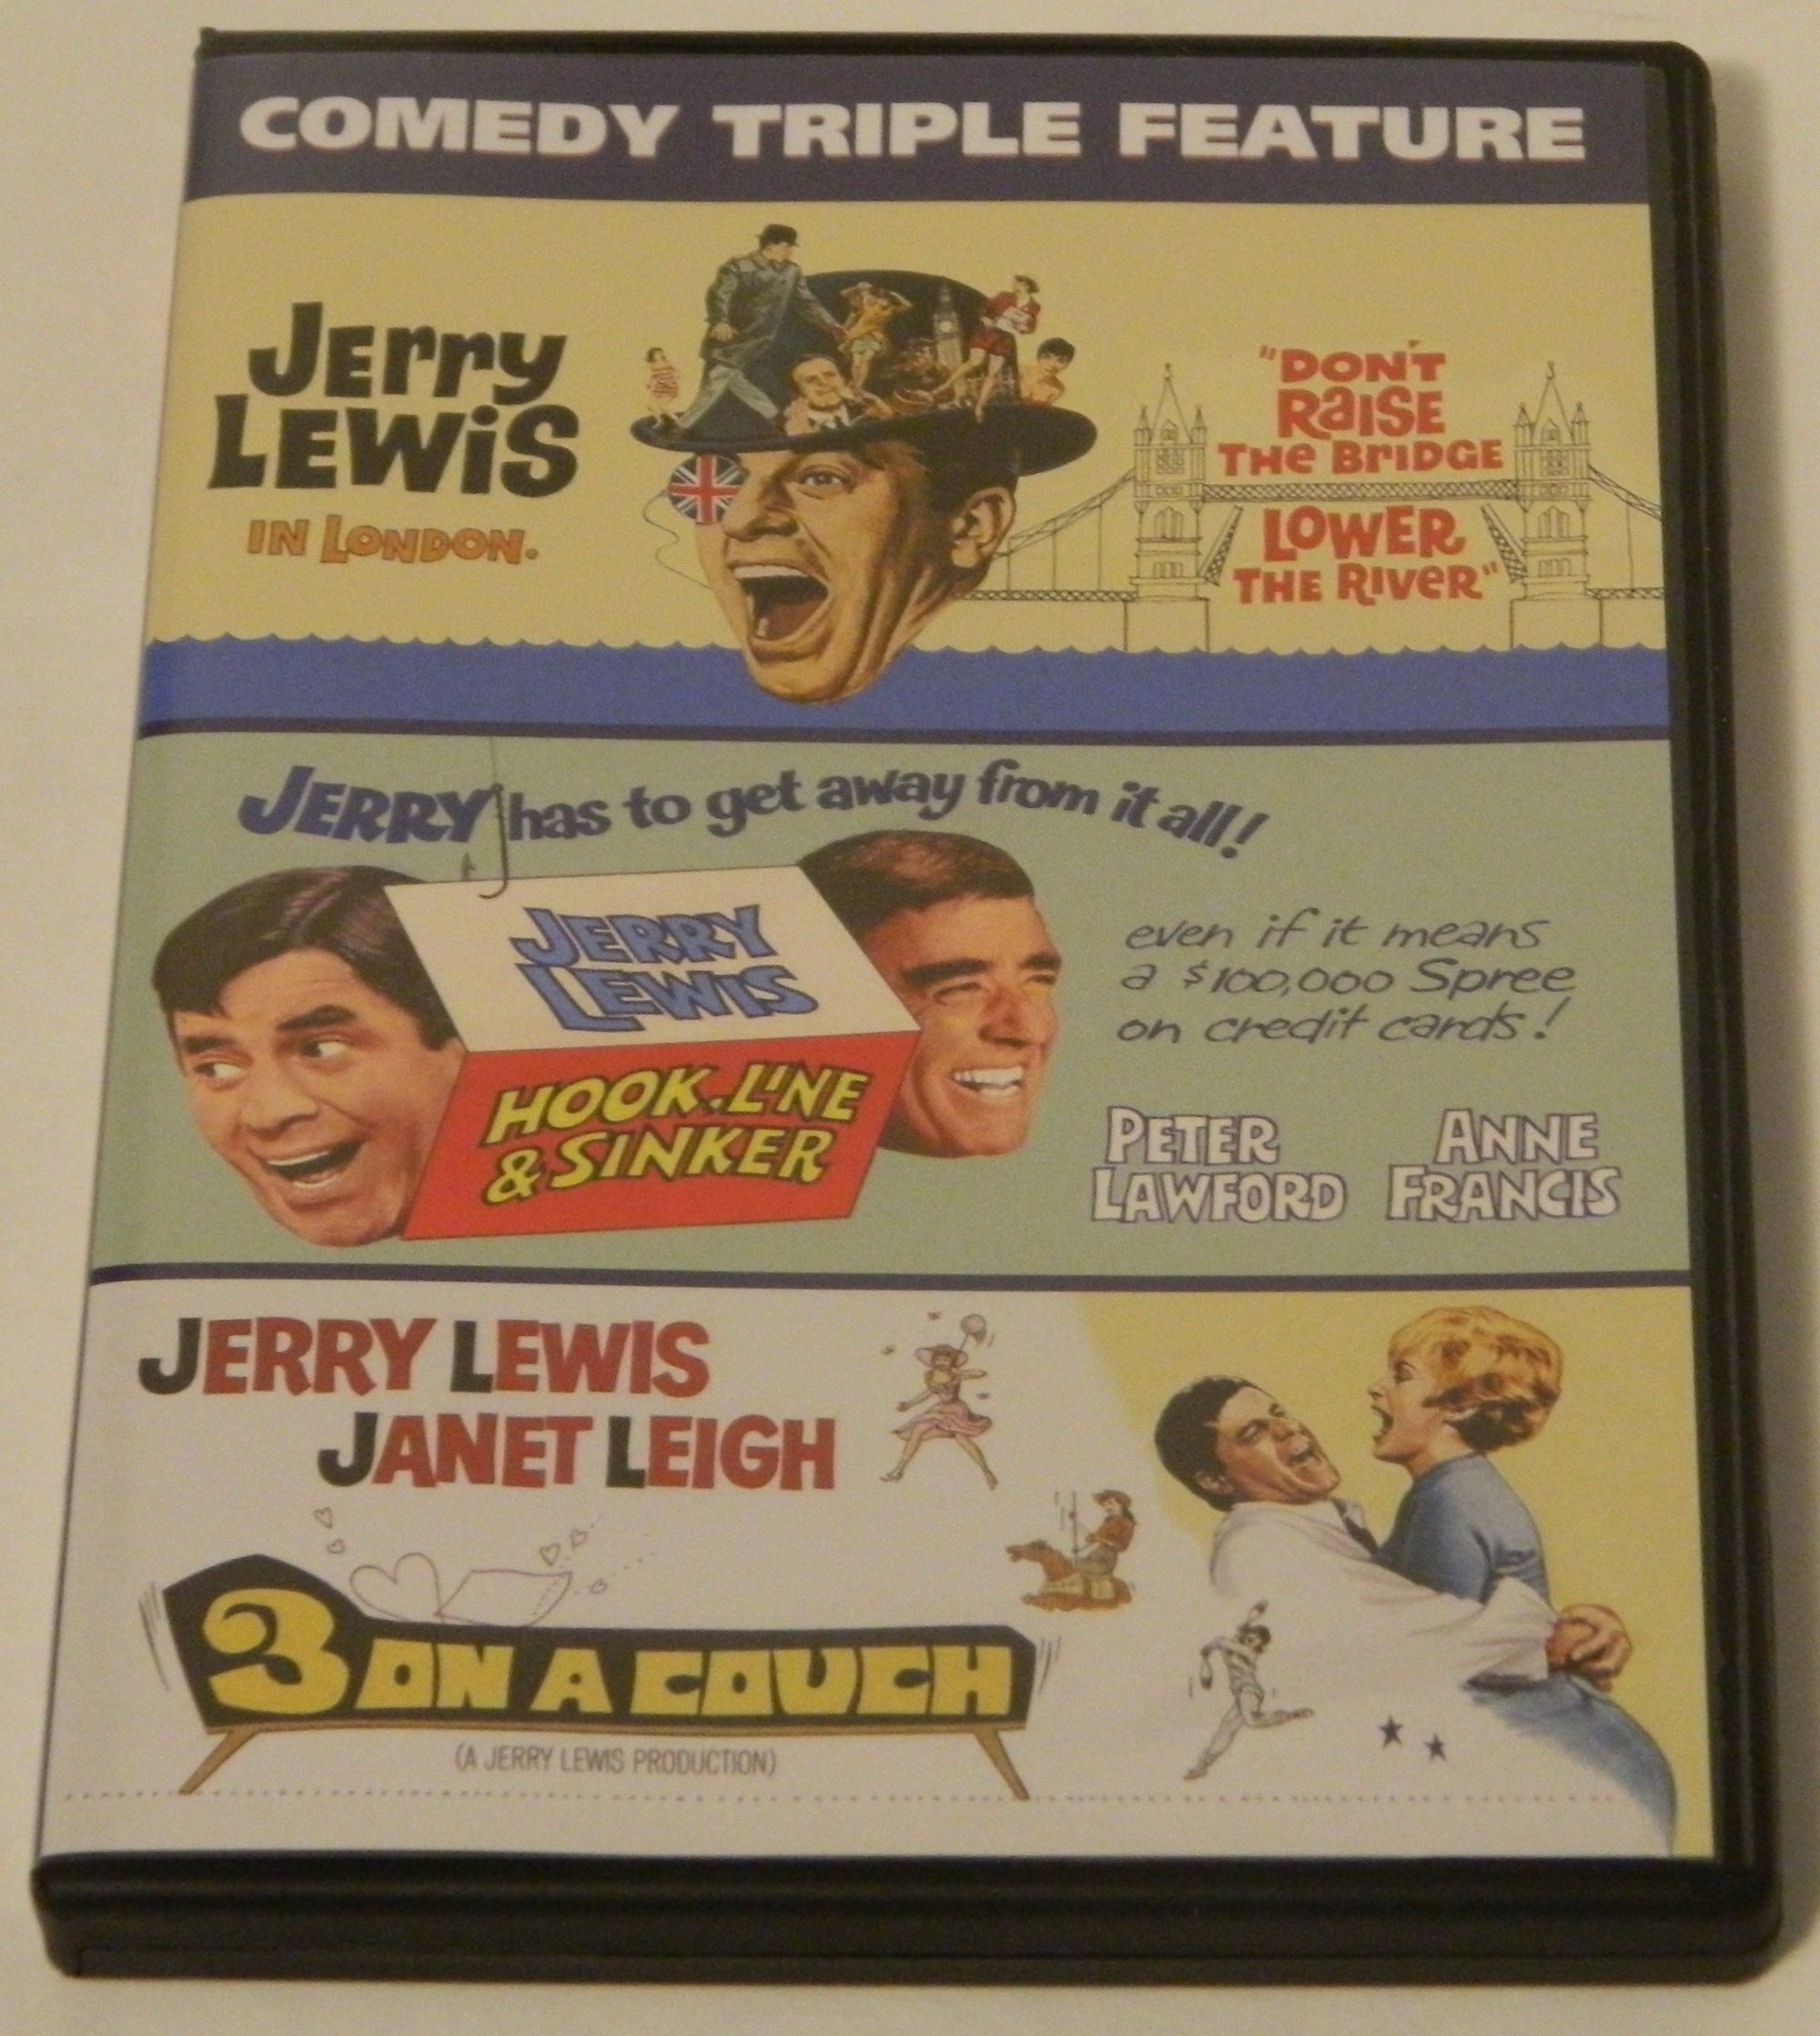 Jerry Lewis Comedy Triple Feature DVD